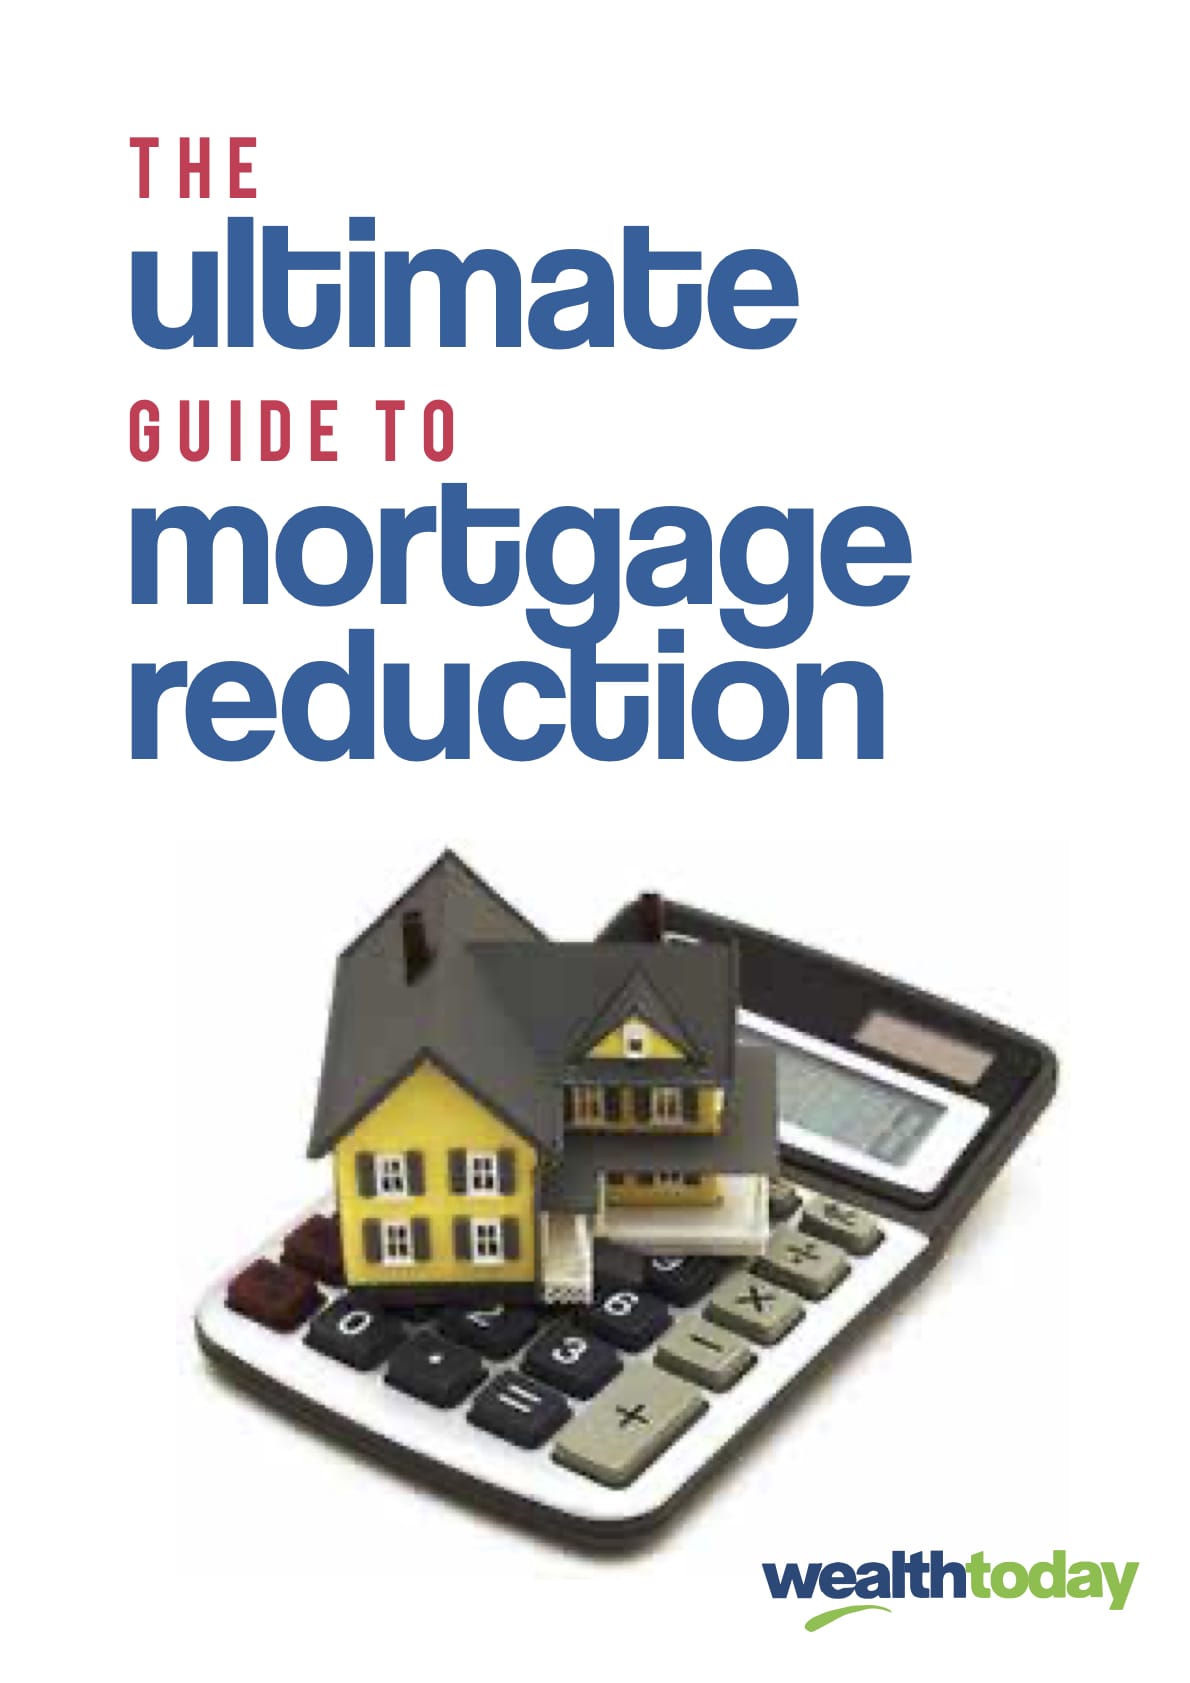 The-Ultimate-Mortgage-Reduction-Guide-2018-WT-Form-201810